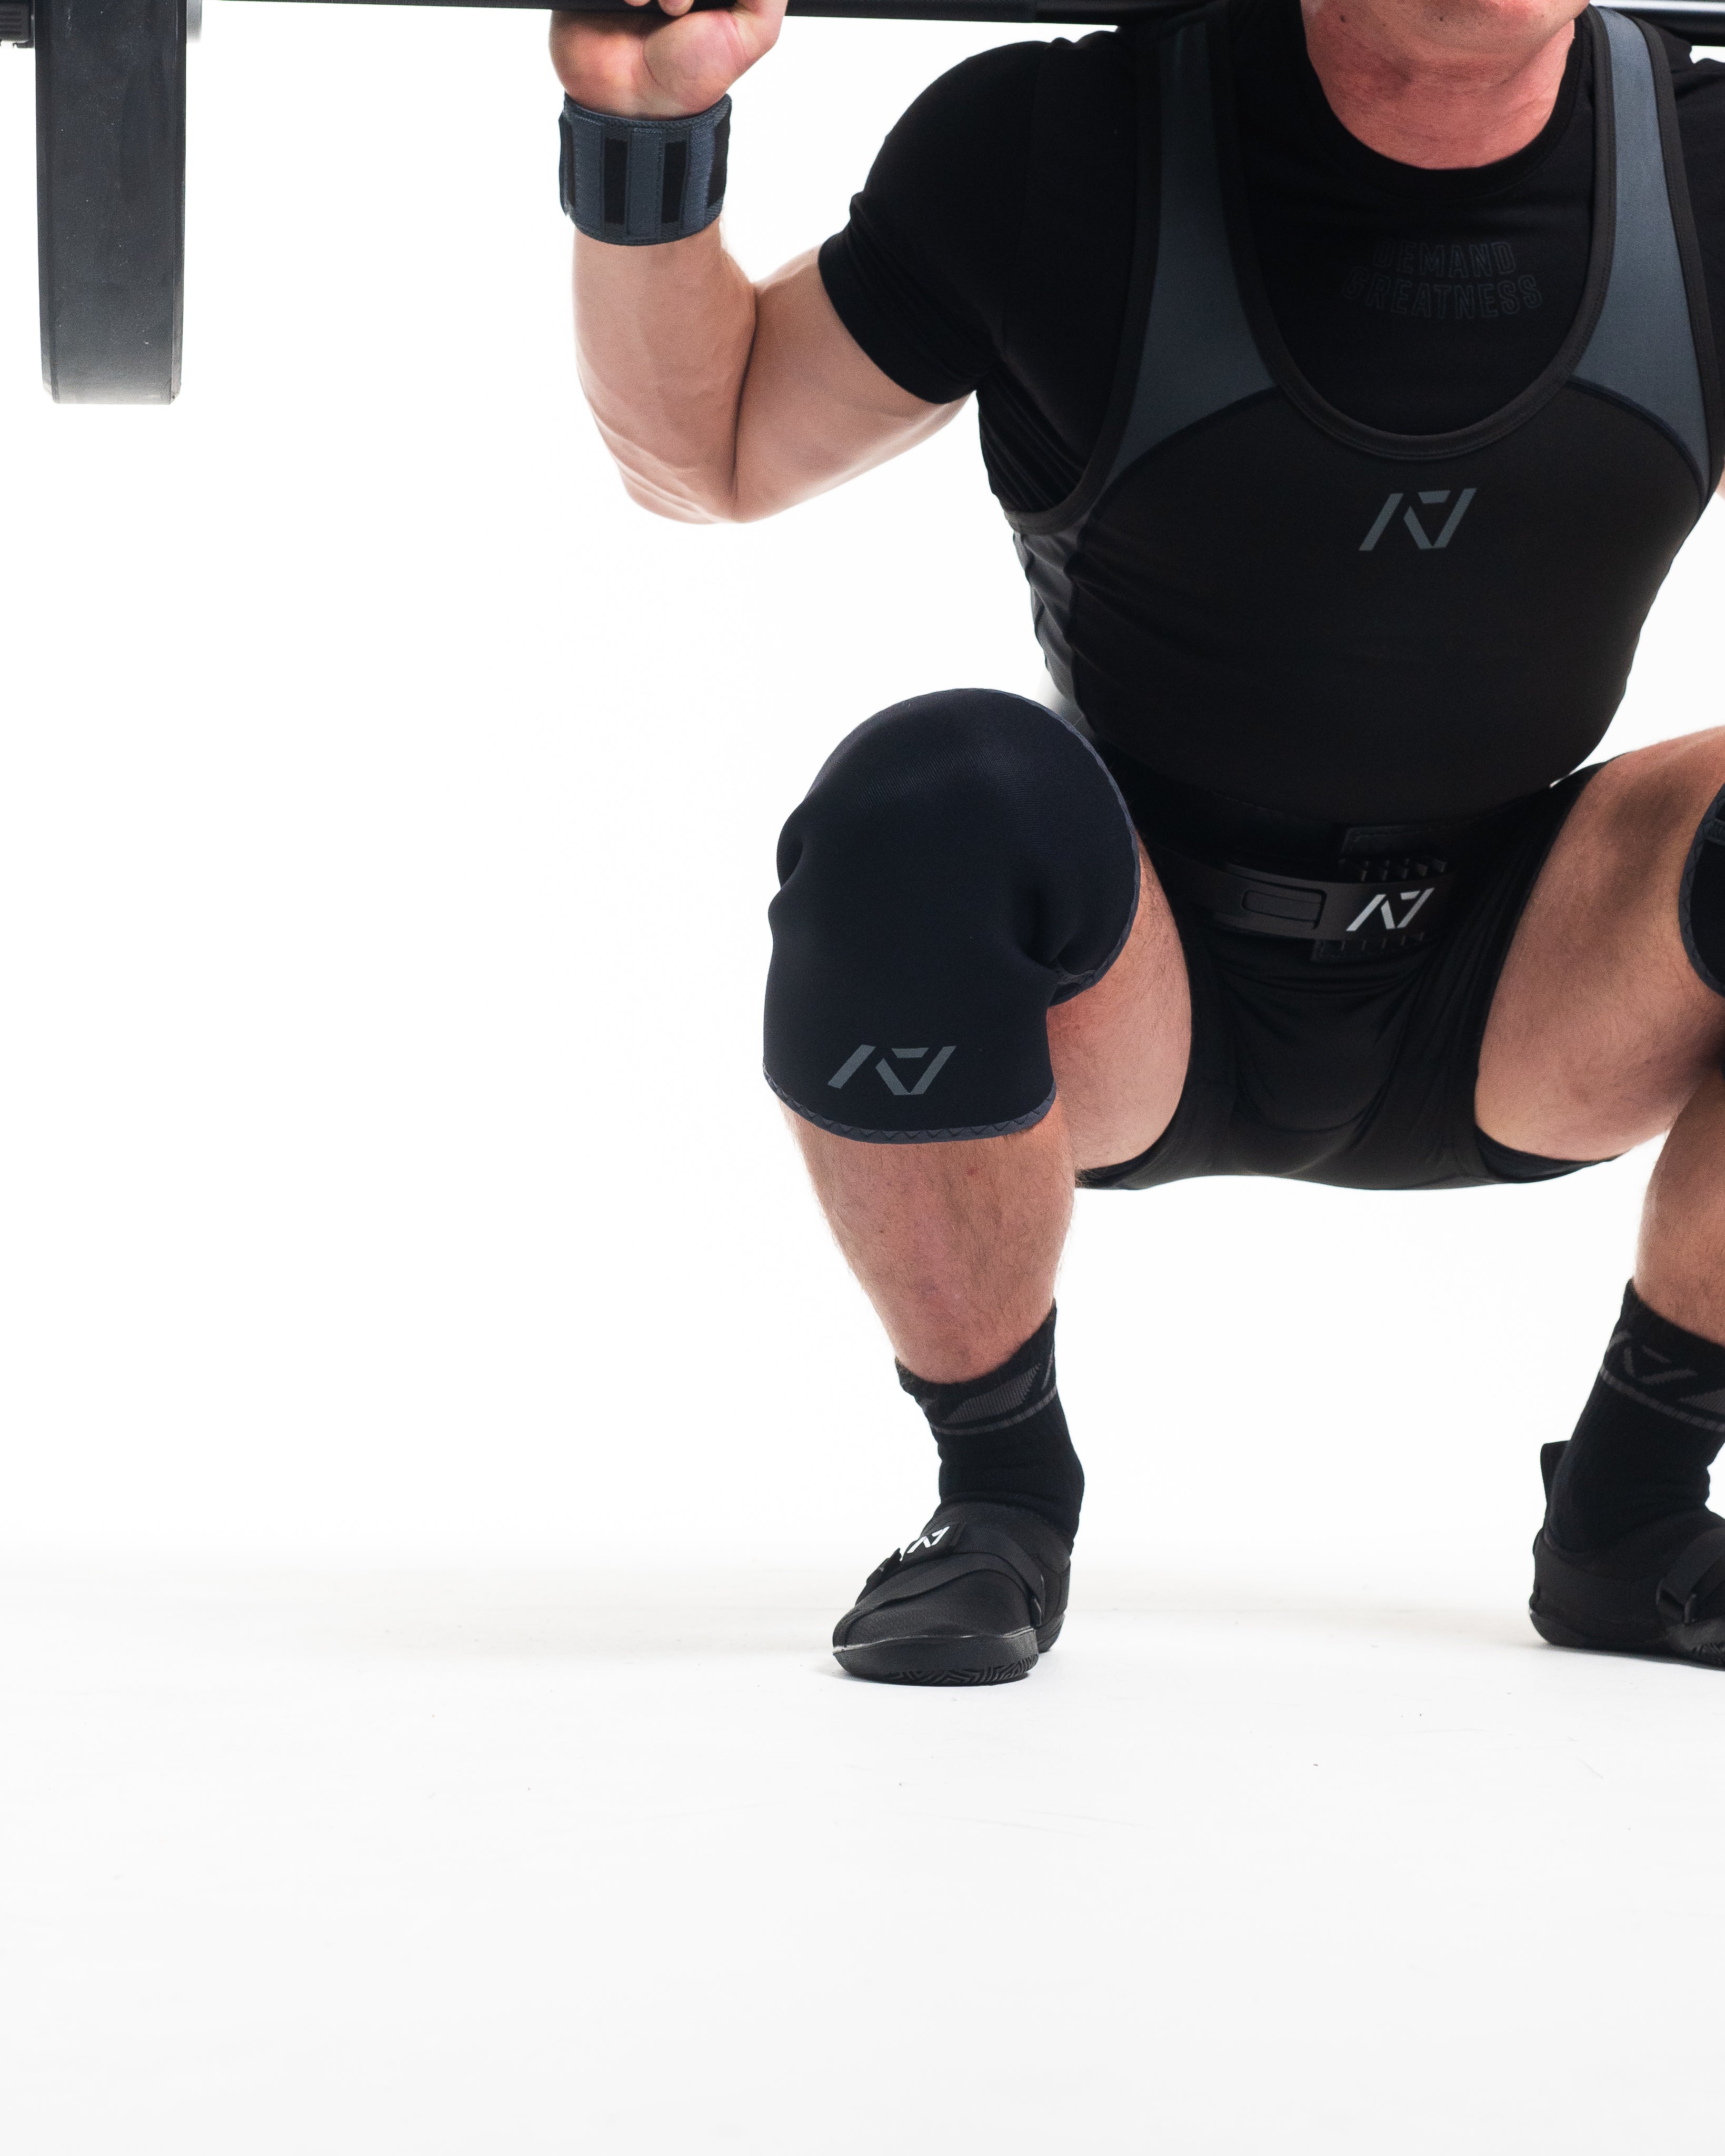 A7 IPF Approved Hourglass Knee Sleeves feature an hourglass-shaped centre taper fit to help provide knee compression while maintaining proper tightness around the calf and quad, offered in three stiffnesses (Flexi, Stiff and Rigor Mortis). Shop the full A7 Powerlifting IPF Approved Equipment collection. The IPF Approved Kit includes Powerlifting Singlet, A7 Meet Shirt, A7 Zebra Wrist Wraps and A7 Deadlift Socks. All A7 Powerlifting Equipment shipping to UK, Norway, Switzerland and Iceland. 